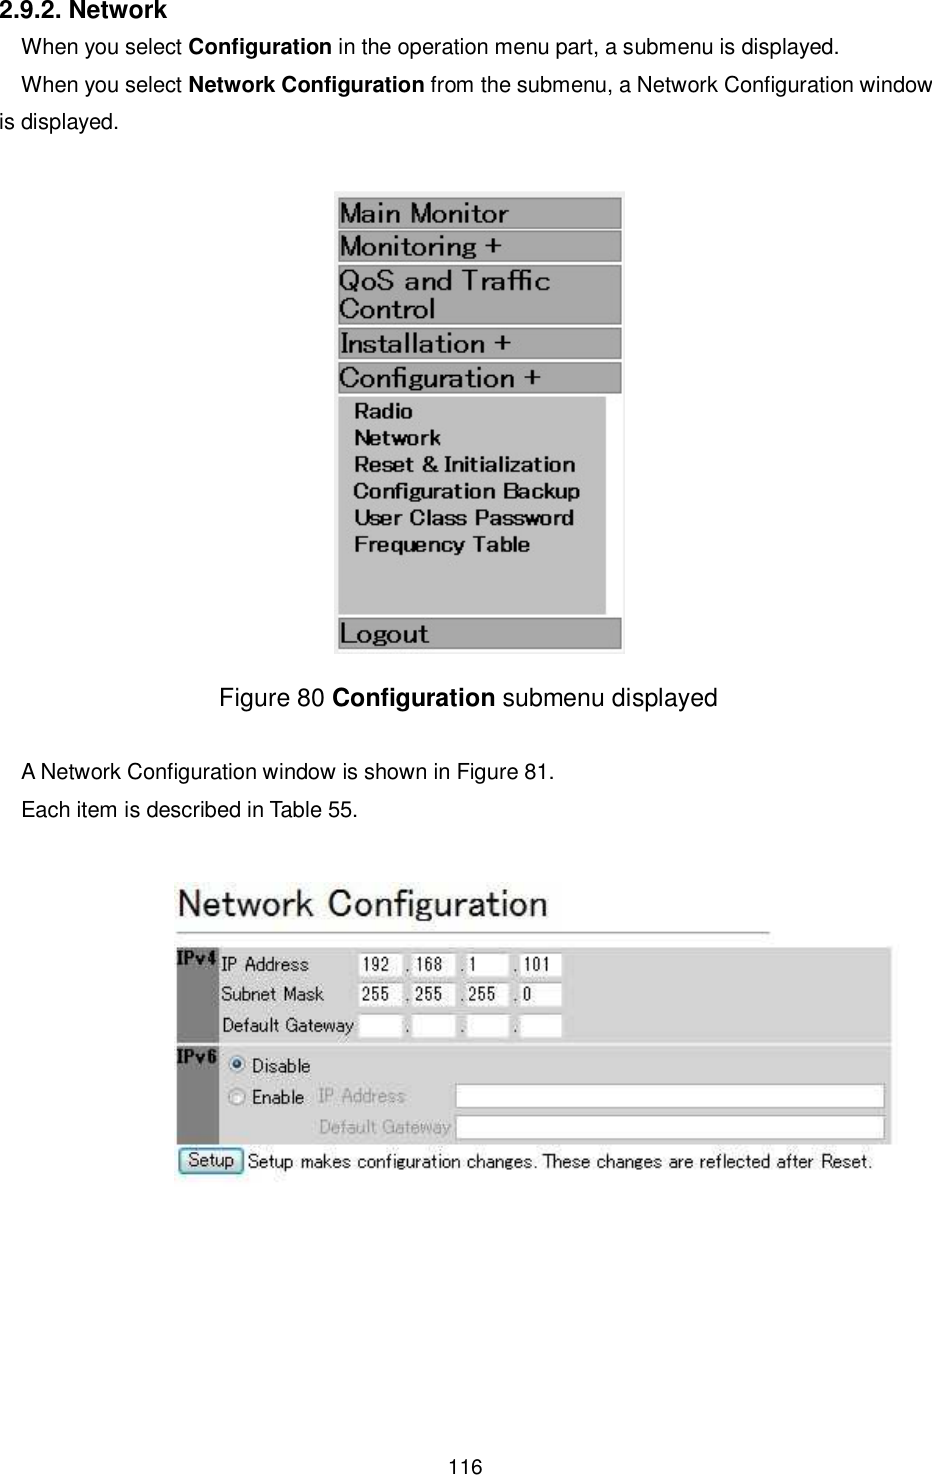    116  2.9.2. Network When you select Configuration in the operation menu part, a submenu is displayed. When you select Network Configuration from the submenu, a Network Configuration window is displayed.   Figure 80 Configuration submenu displayed  A Network Configuration window is shown in Figure 81. Each item is described in Table 55.  